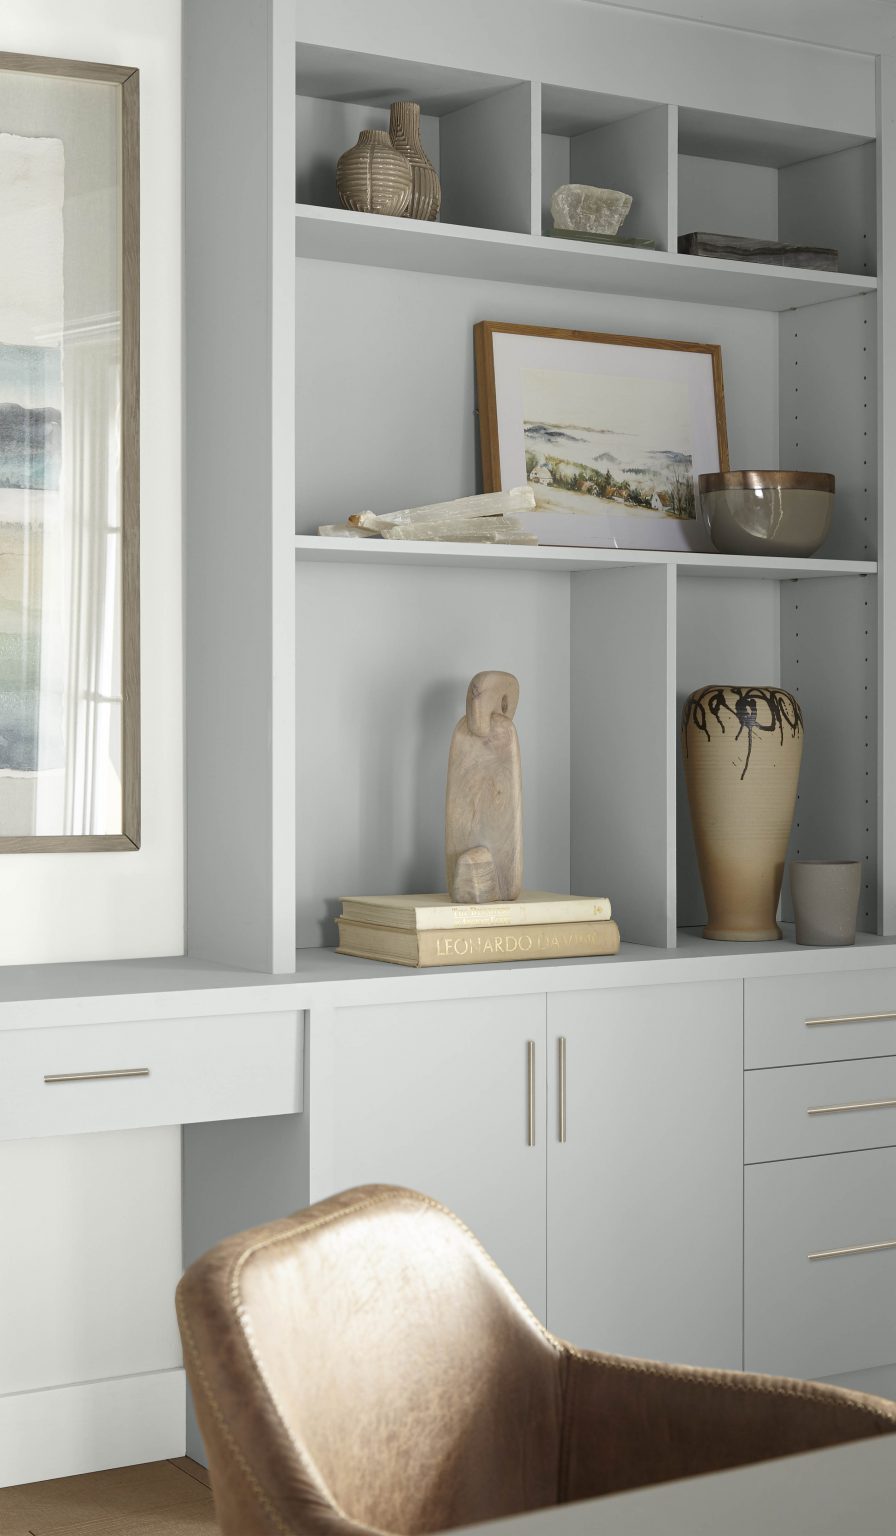 A built-in bookshelf painted in Platinum and surrounding walls in Ultra Pure White